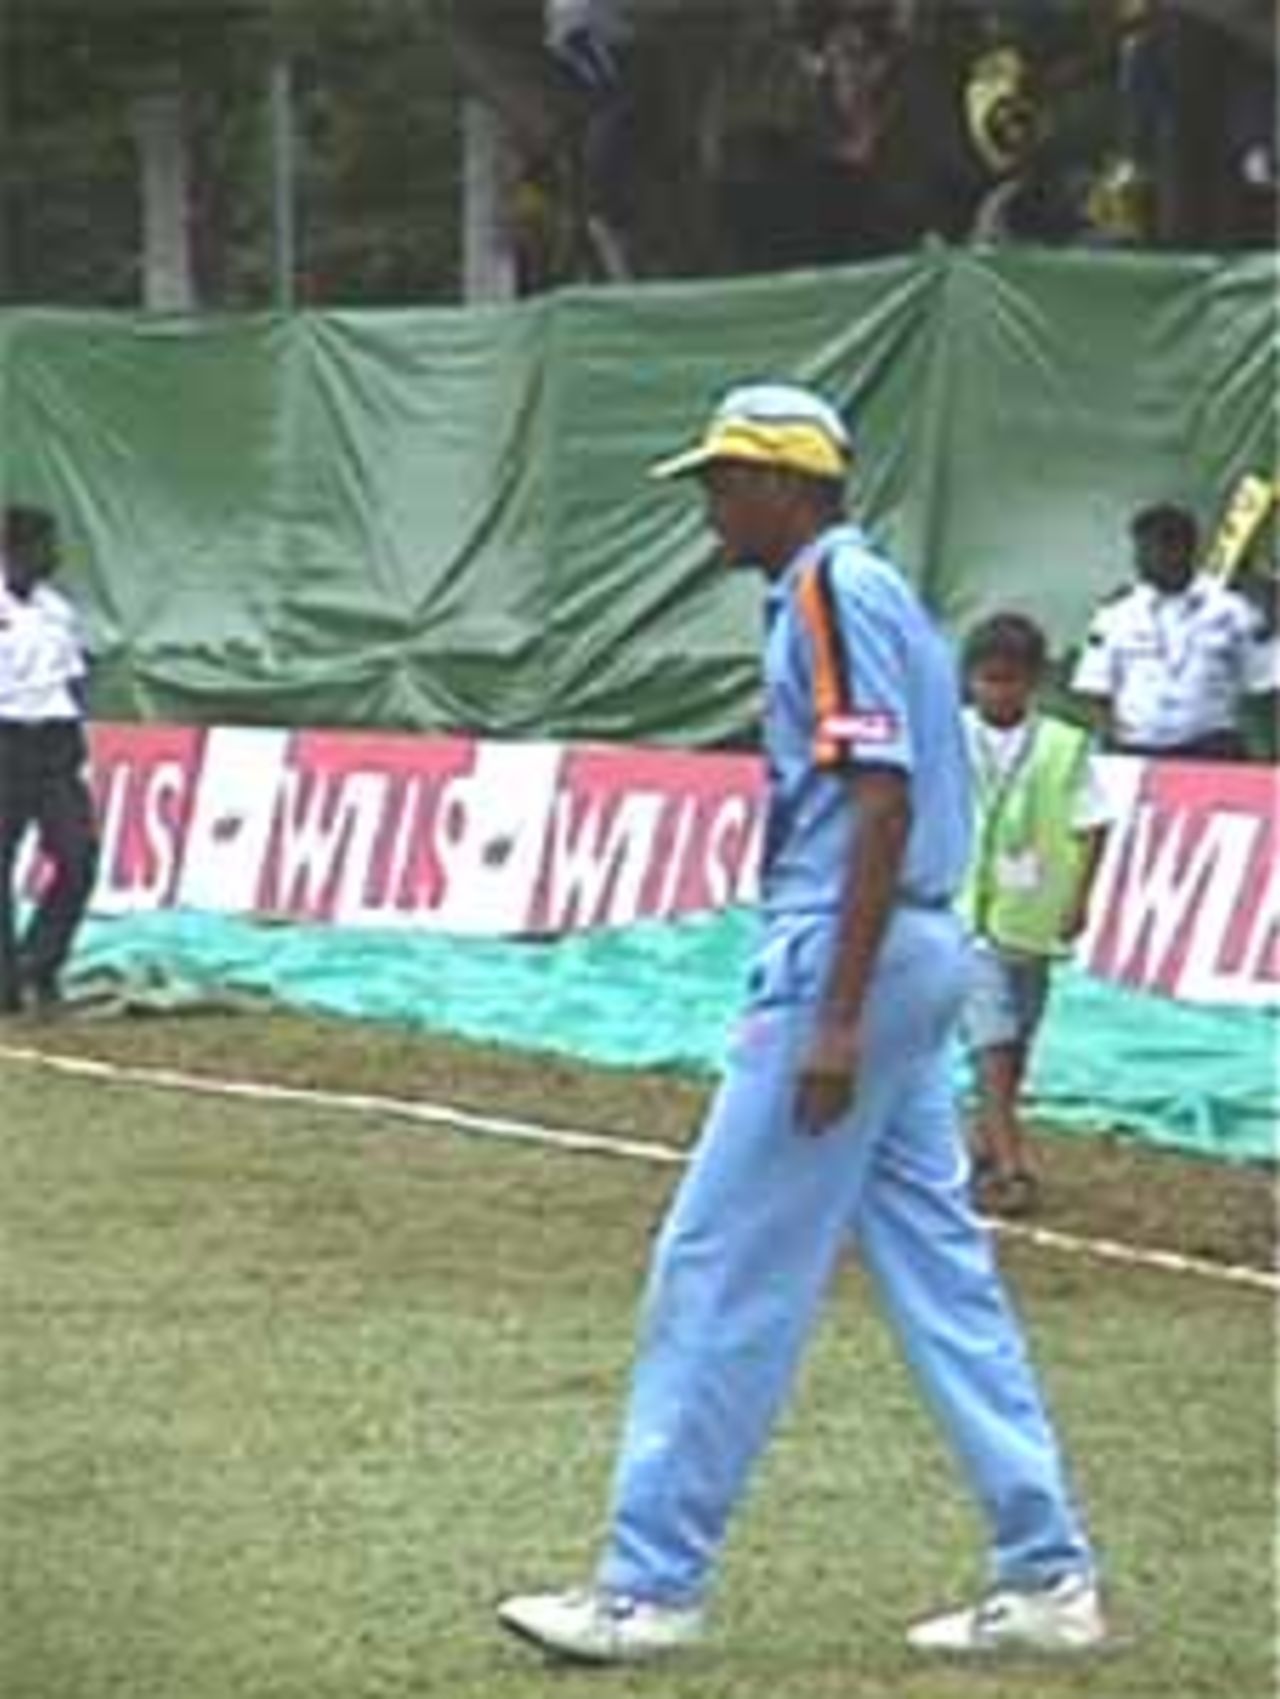 Mohanty at the boundary, India v West Indies (3rd ODI), Coca-Cola Singapore Challenge, 1999-2000, Kallang Ground, Singapore, 5 Sep 1999.